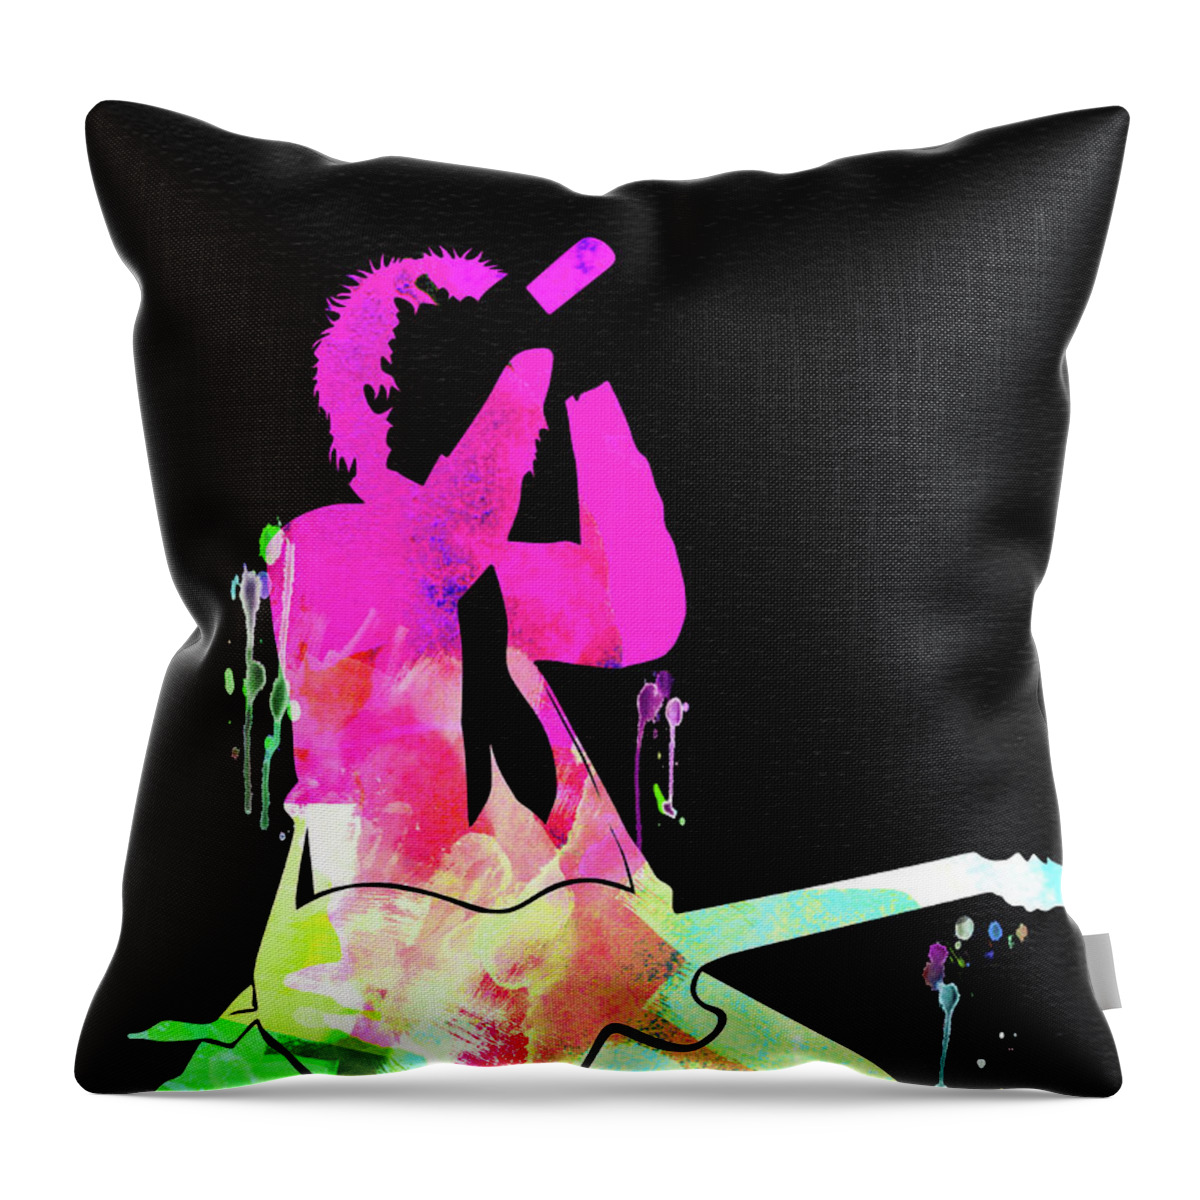 Green Day Throw Pillow featuring the mixed media Green Day Watercolor by Naxart Studio